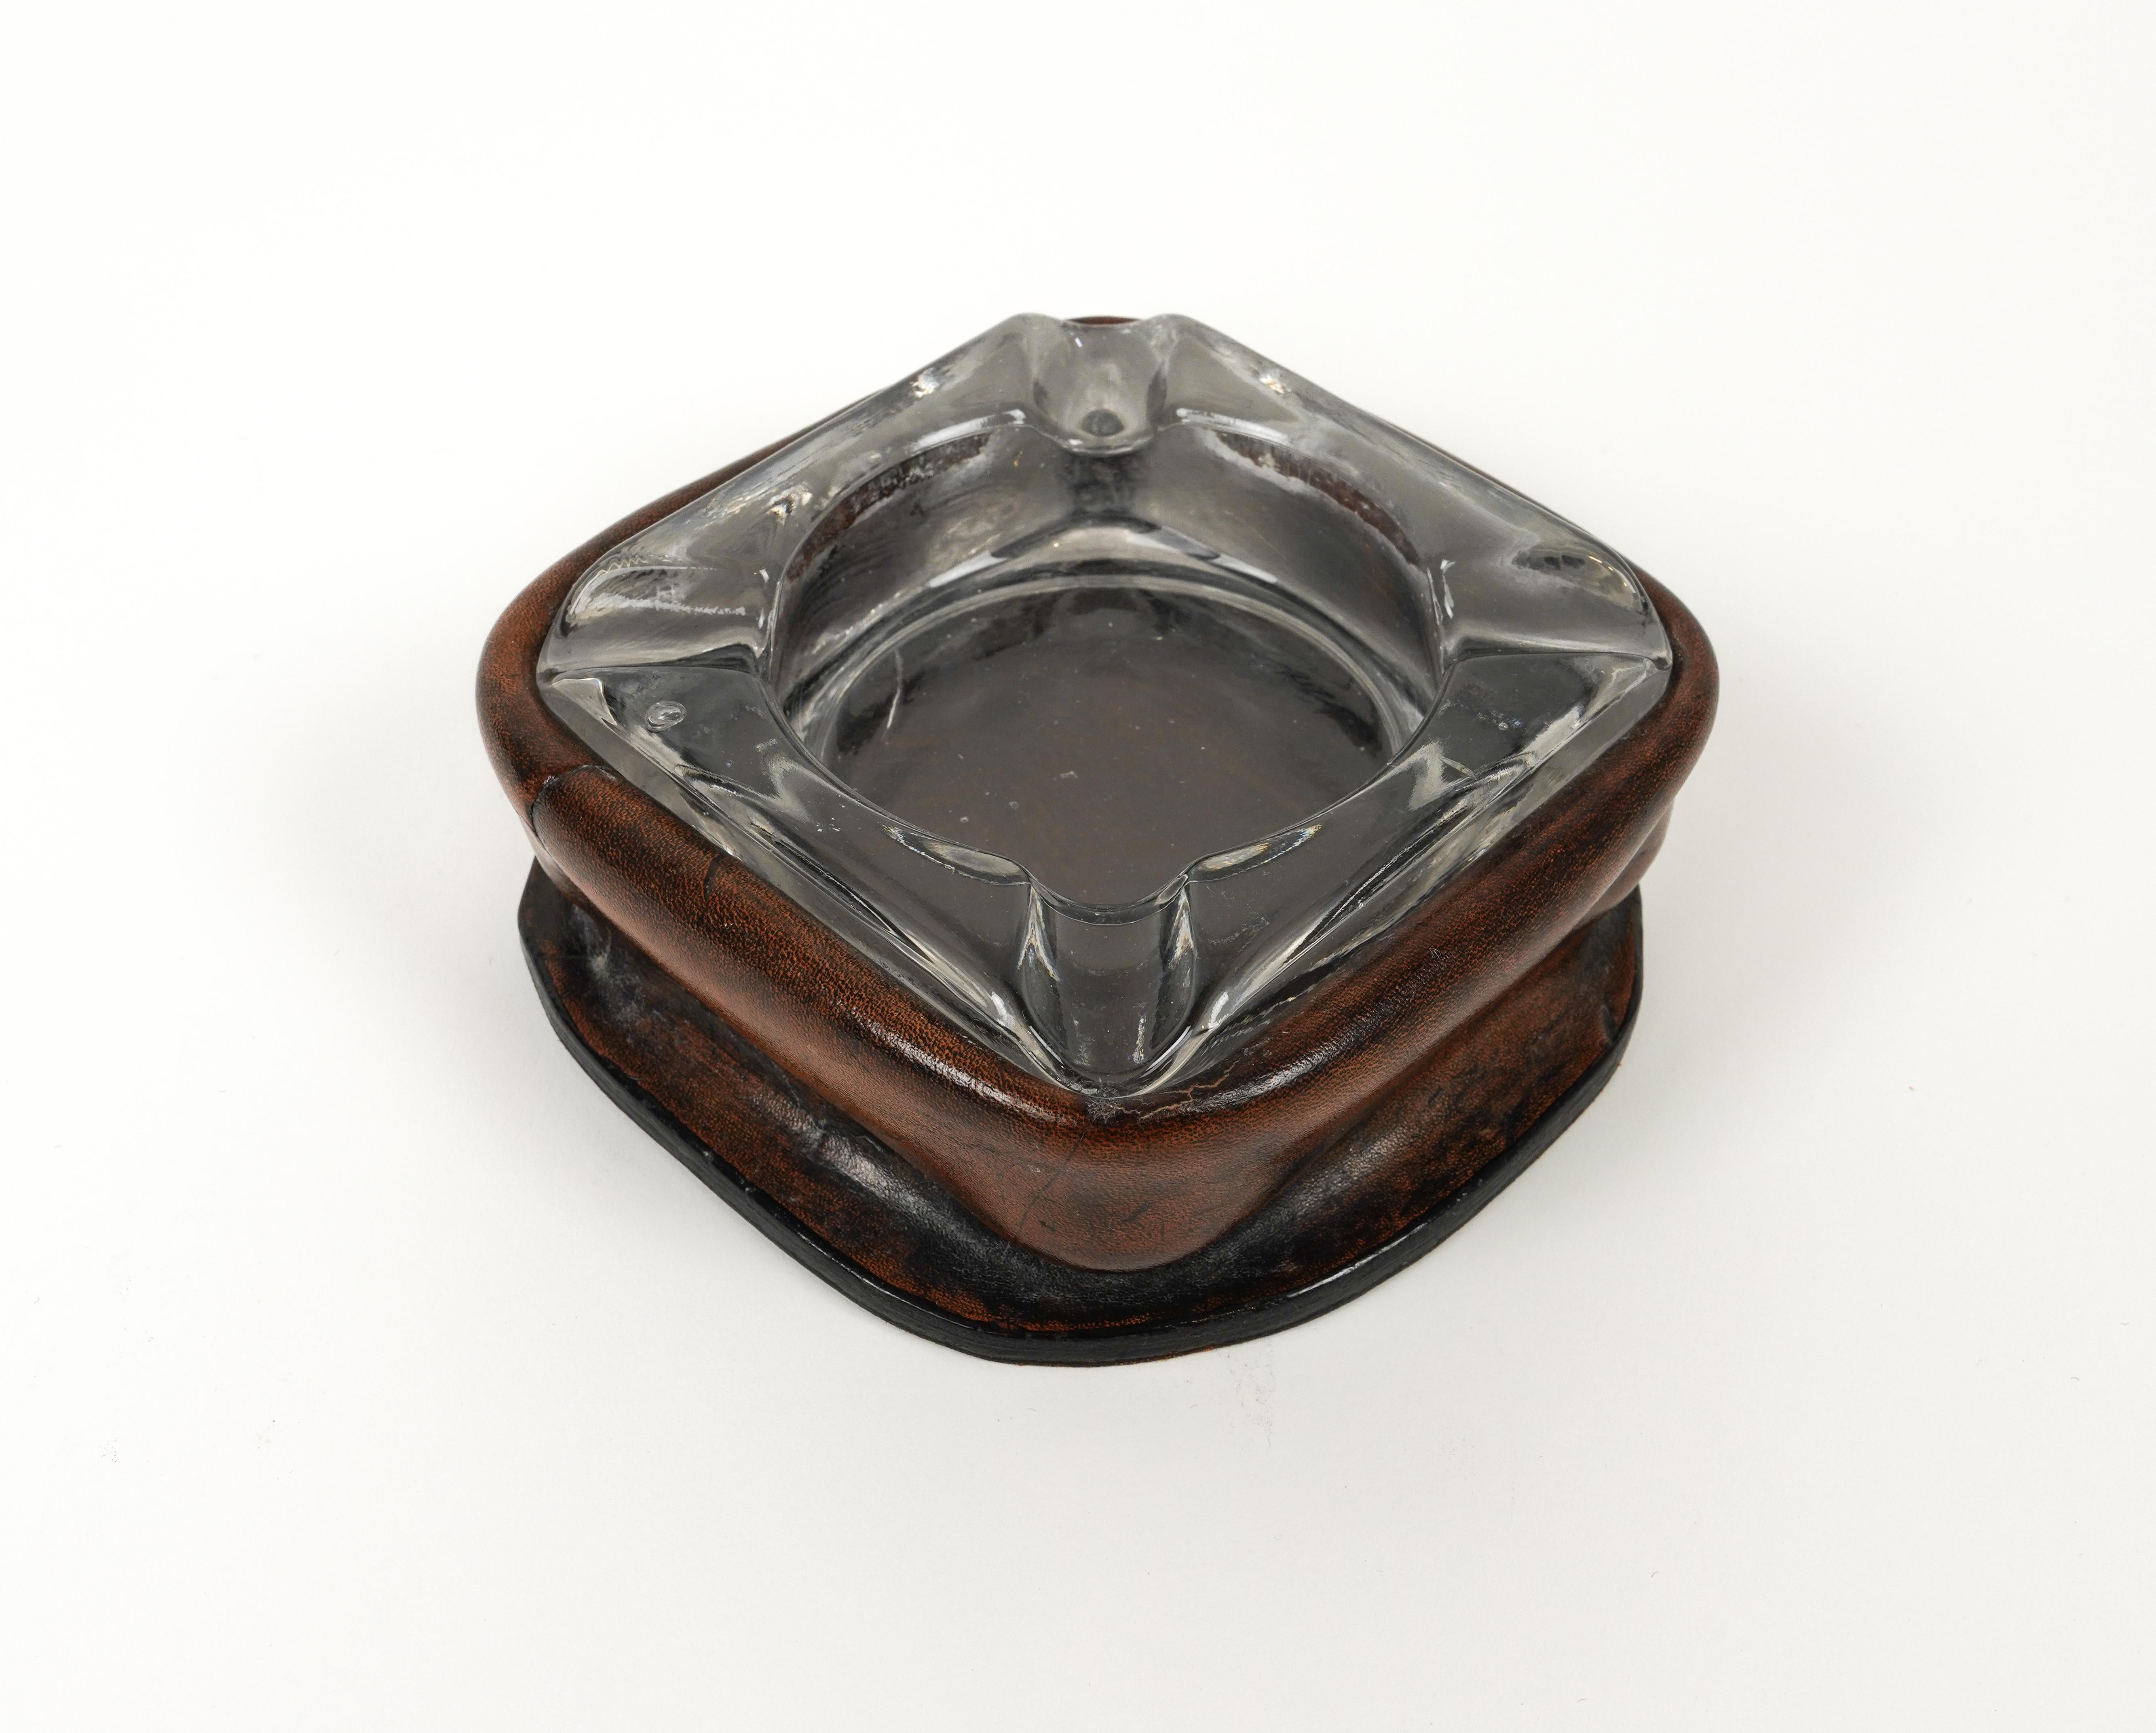 Midcentury Squared Ashtray in Leather and Glass Jacques Adnet Style, Italy 1970s For Sale 5